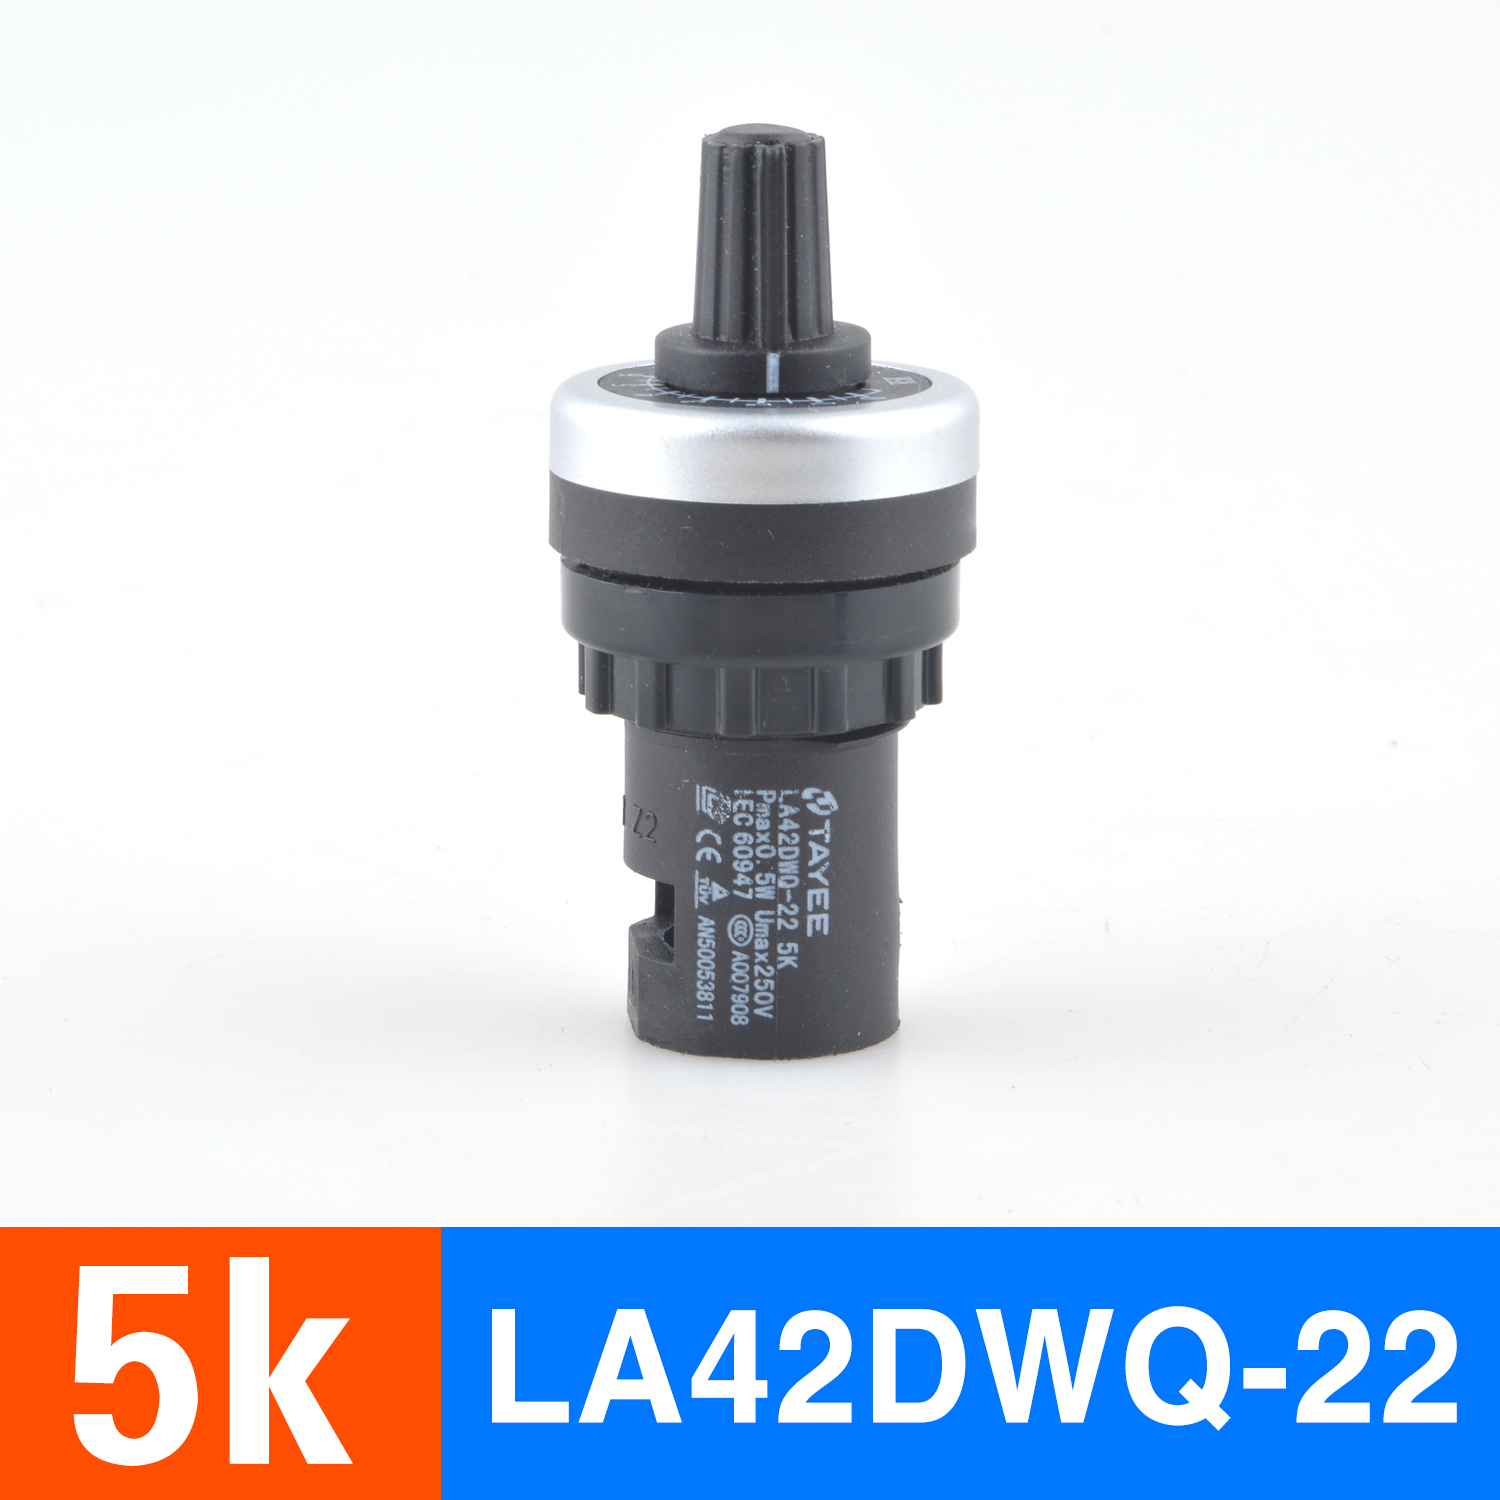 Genuine 5Kquality goods Shanghai Tianyi Frequency converter adjust speed potentiometer precise LA42DWQ-22 governor 22mm5K10K